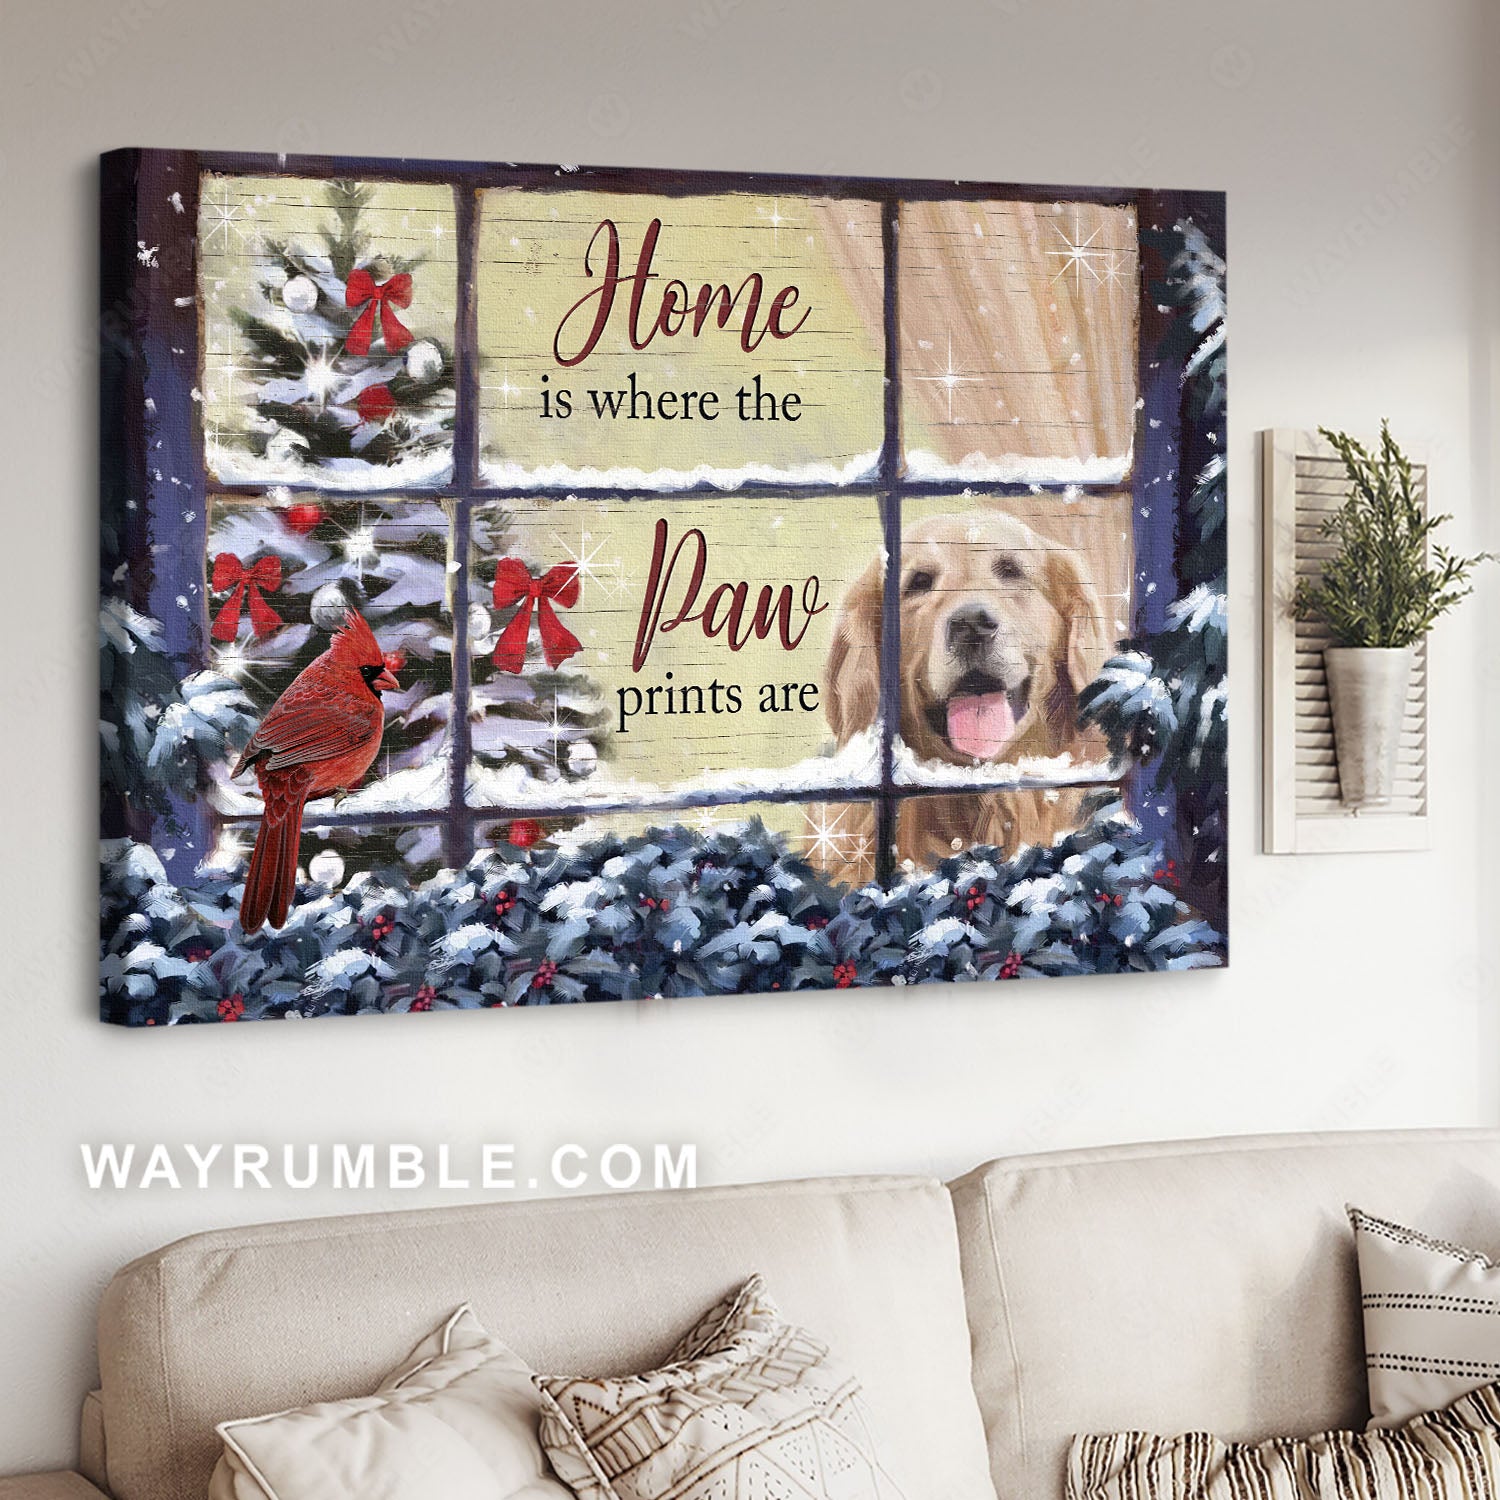 Golden Retriever, Red cardinal, Christmas tree, Home is where the paw prints are - Jesus Landscape Canvas Prints, Home Decor Wall Art